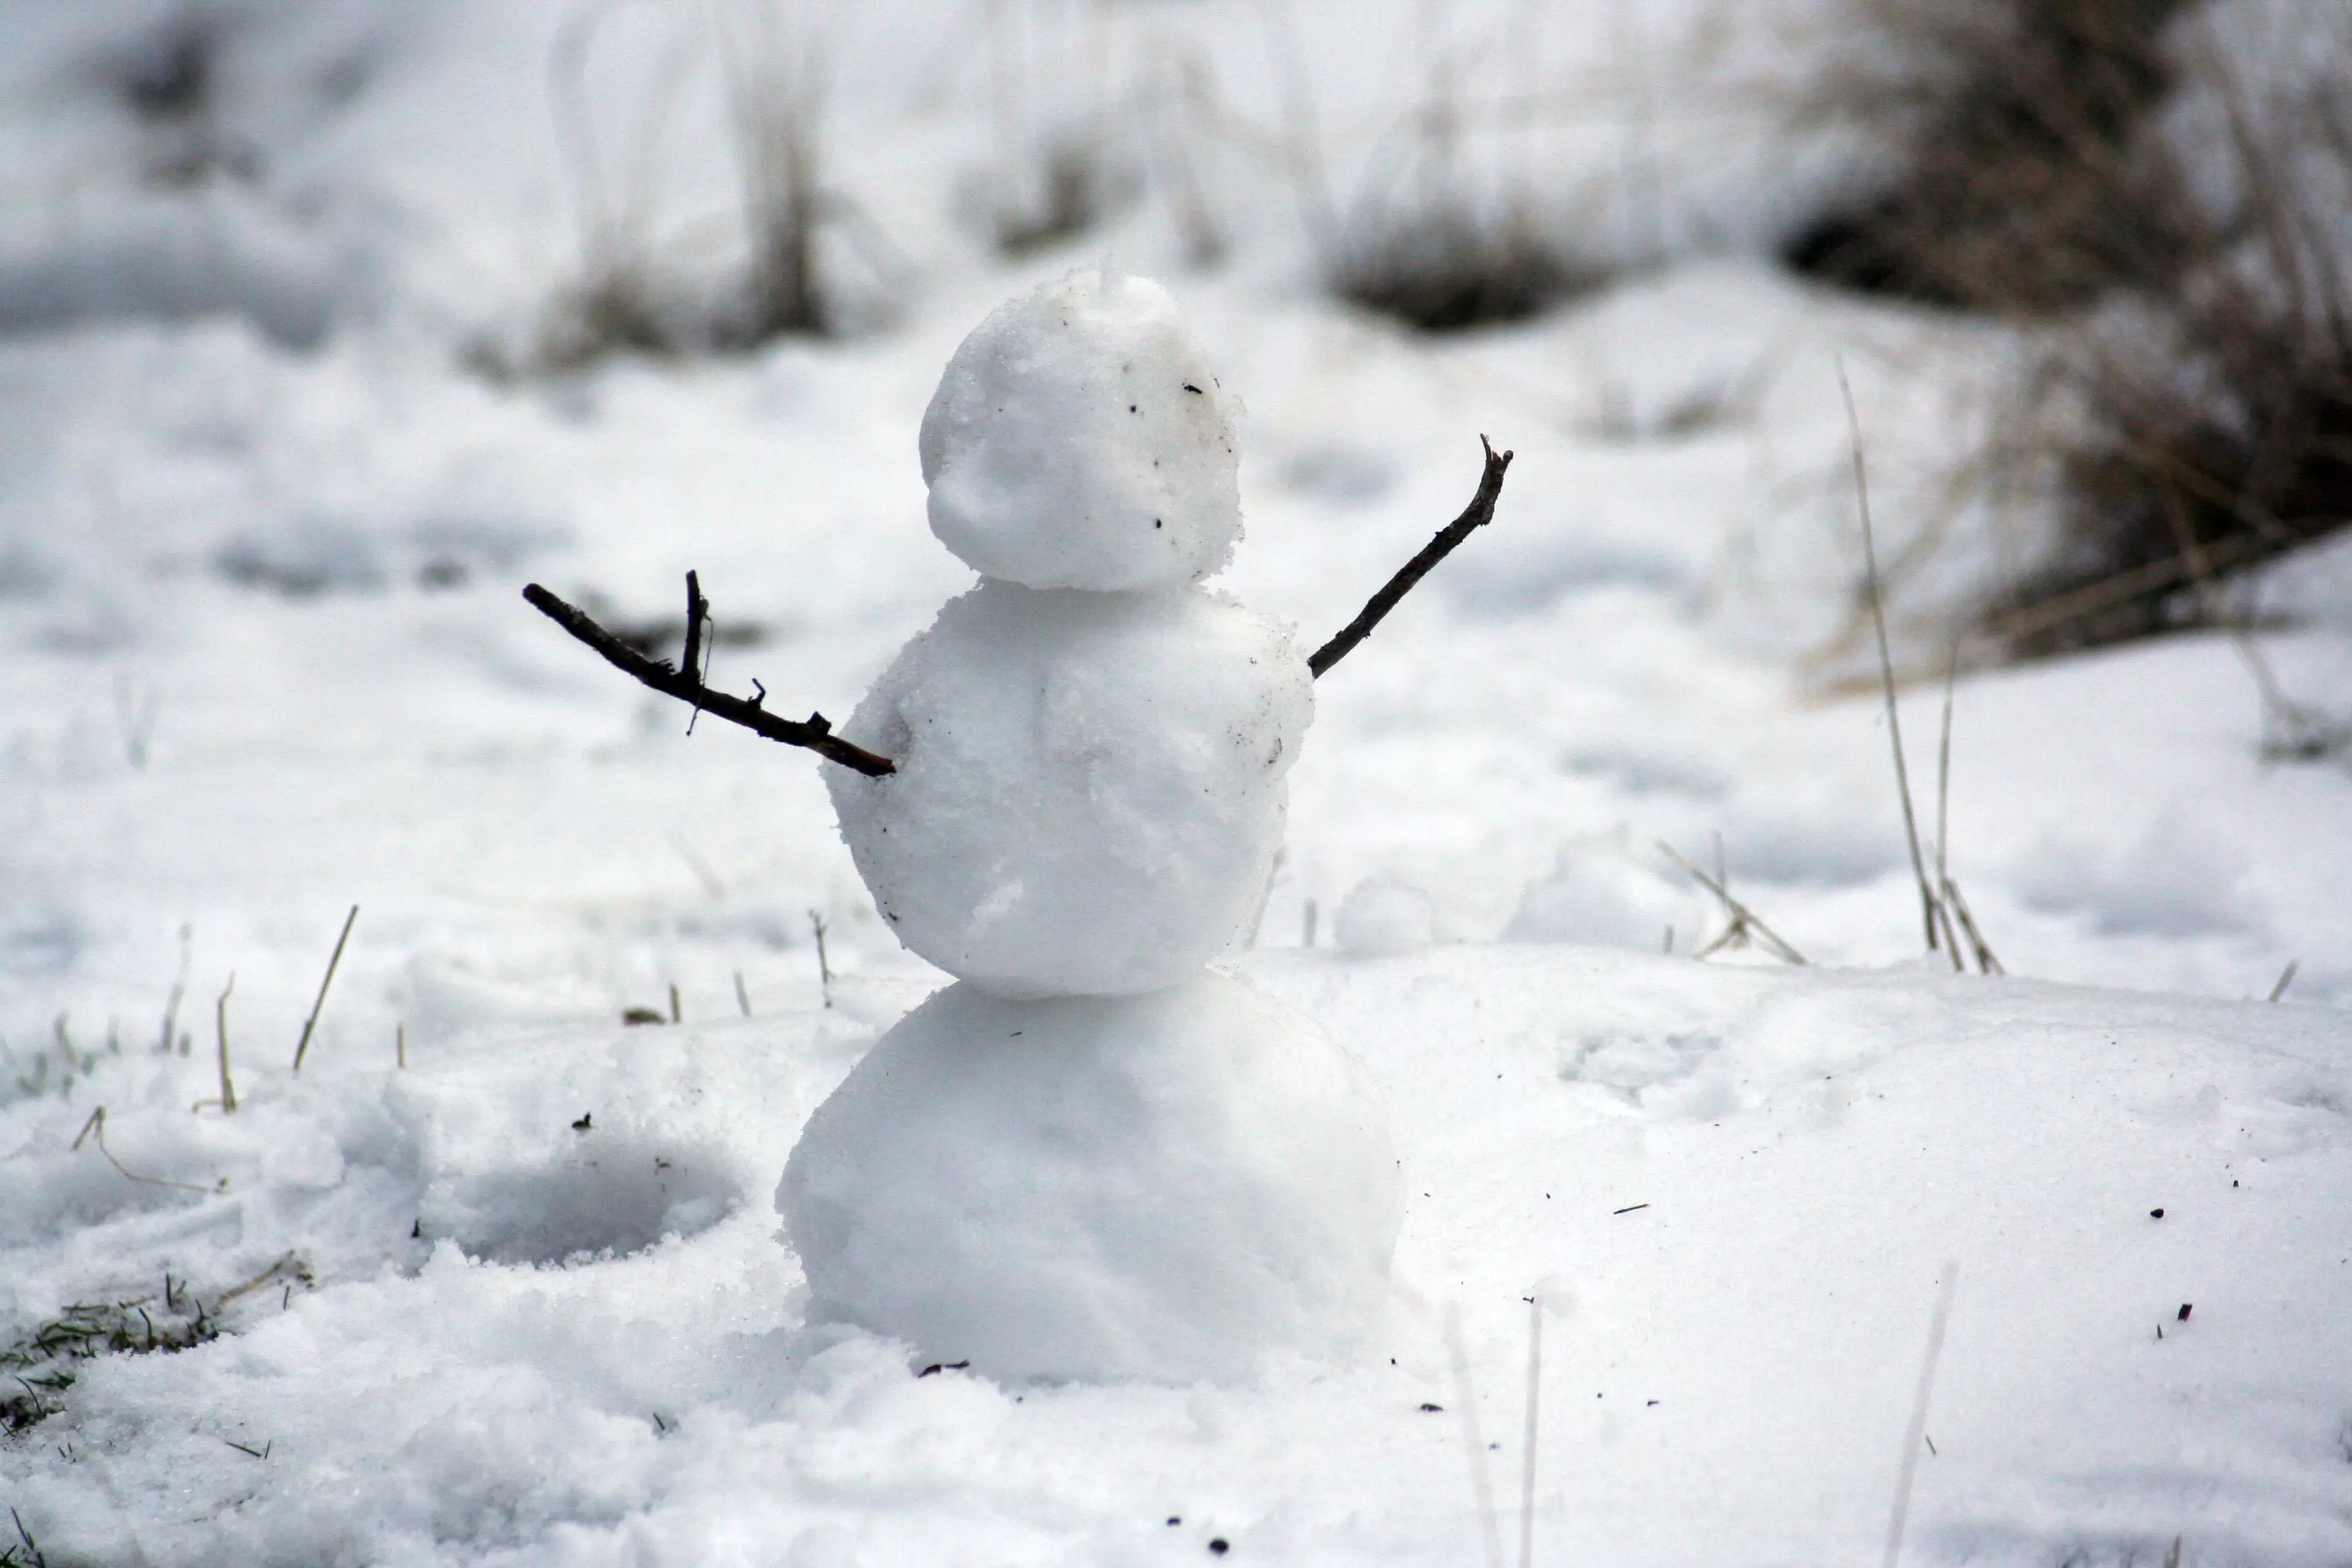 Will you be building a snowman this year (